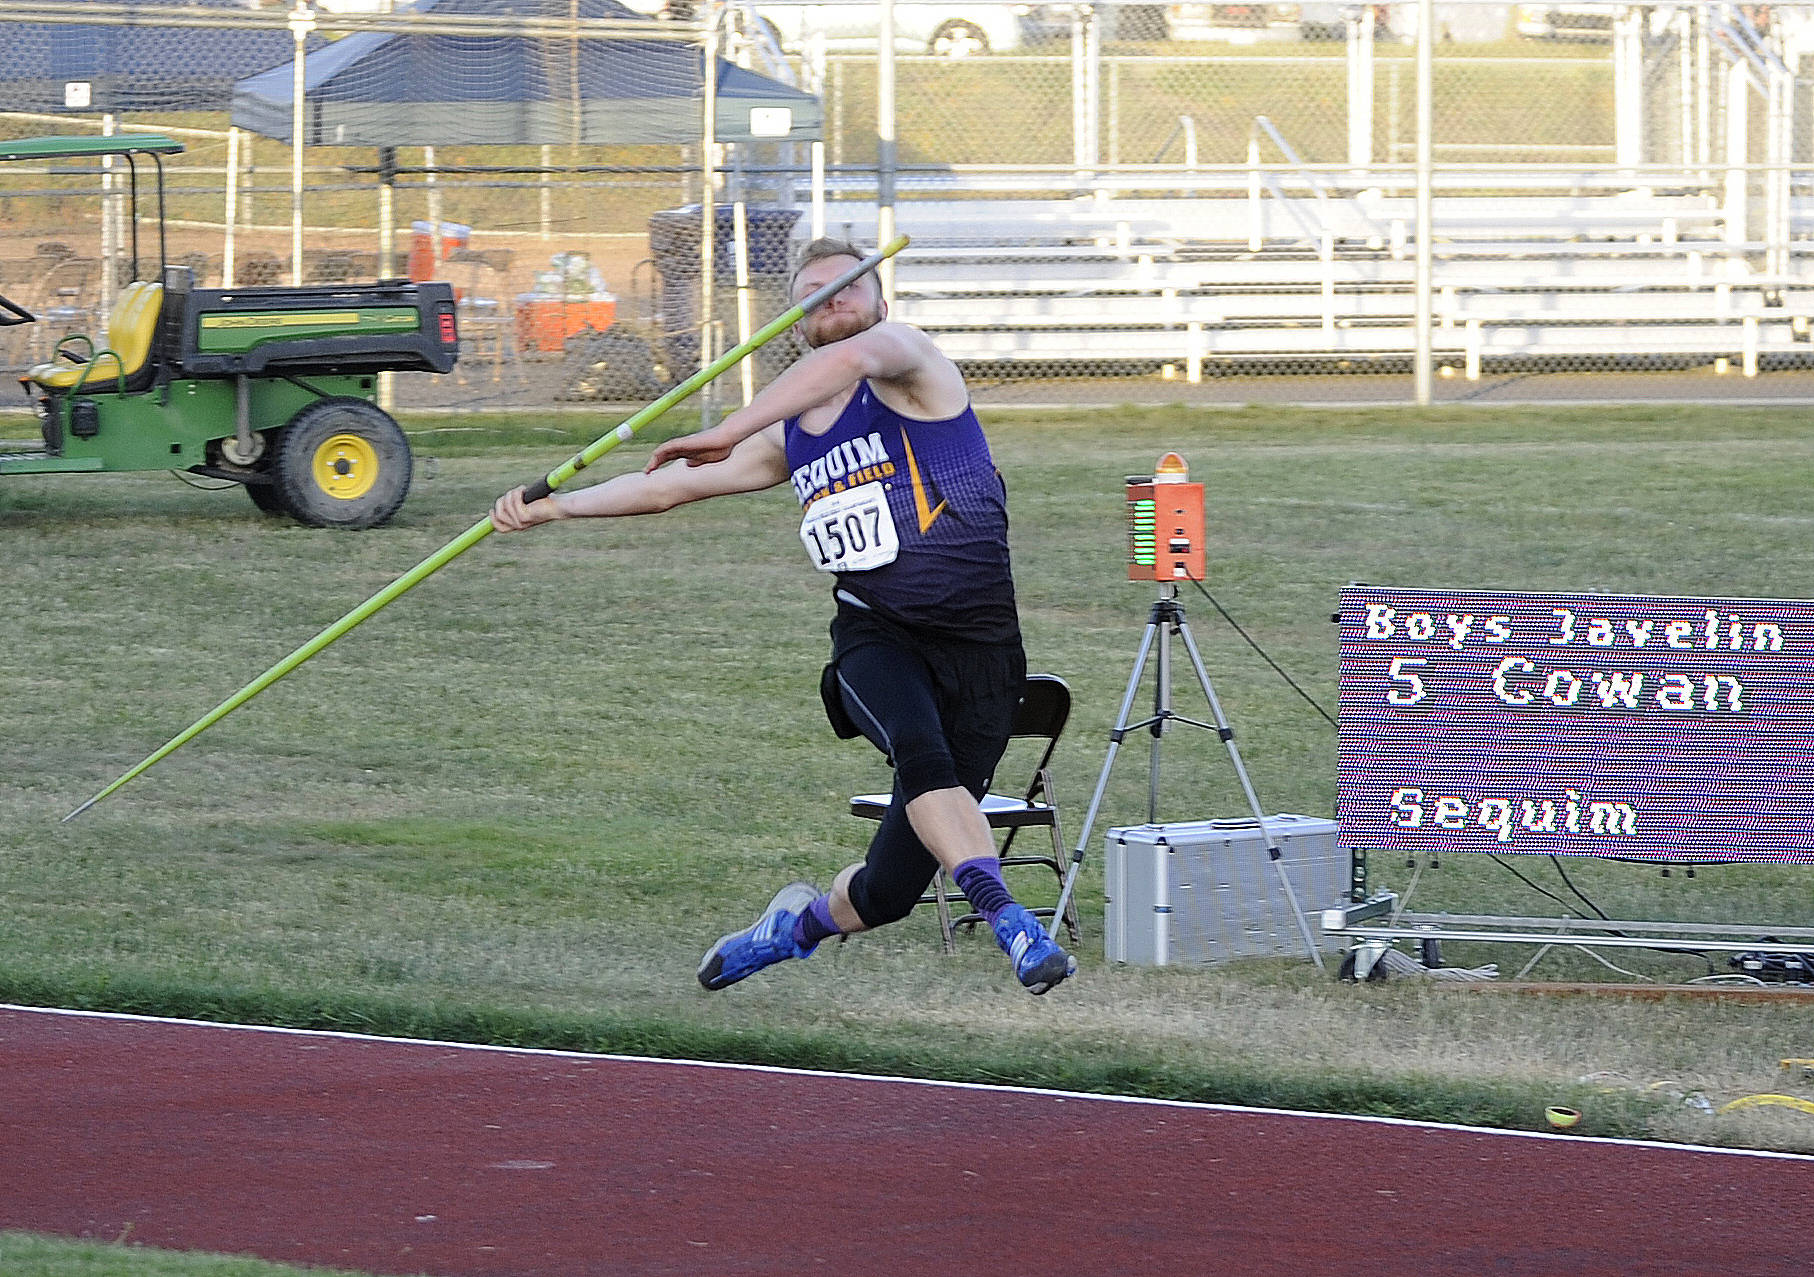 Saving the best for last: Sequim’s Riley Cowan rears back and launches a 182-foot 6-inch throw in his final effort in the javelin finals on May 24, good for fourth place overall. Cowan set a personal best earlier in the meet, but topped that throw by nearly 13 feet with this final mark.                                Saving the best for last: Sequim’s Riley Cowan rears back and launches a 182-foot 6-inch throw in his final effort in the javelin finals on May 24, good for fourth place overall. Cowan set a personal best earlier in the meet, but topped that throw by nearly 13 feet with this final mark. Sequim Gazette photo by Michael Dashiell